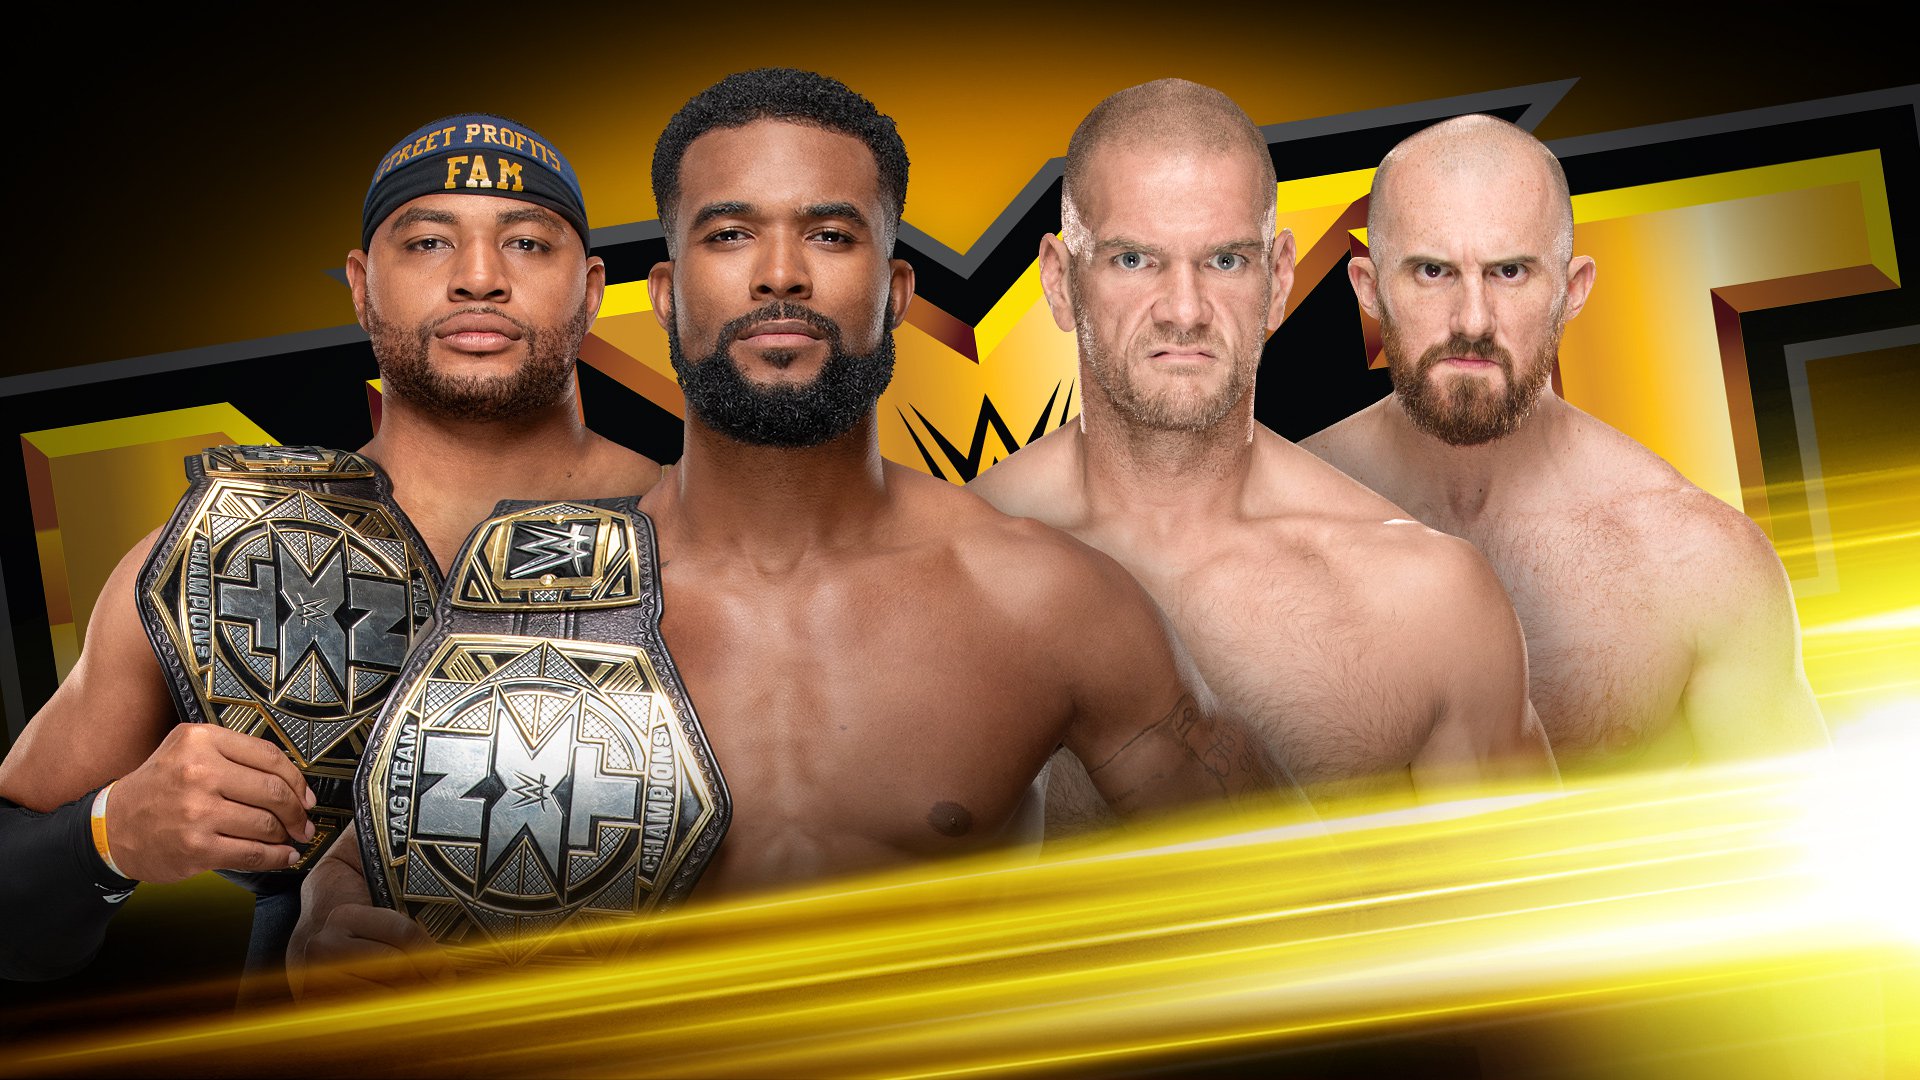 Summertime sizzles with NXT Tag Title action